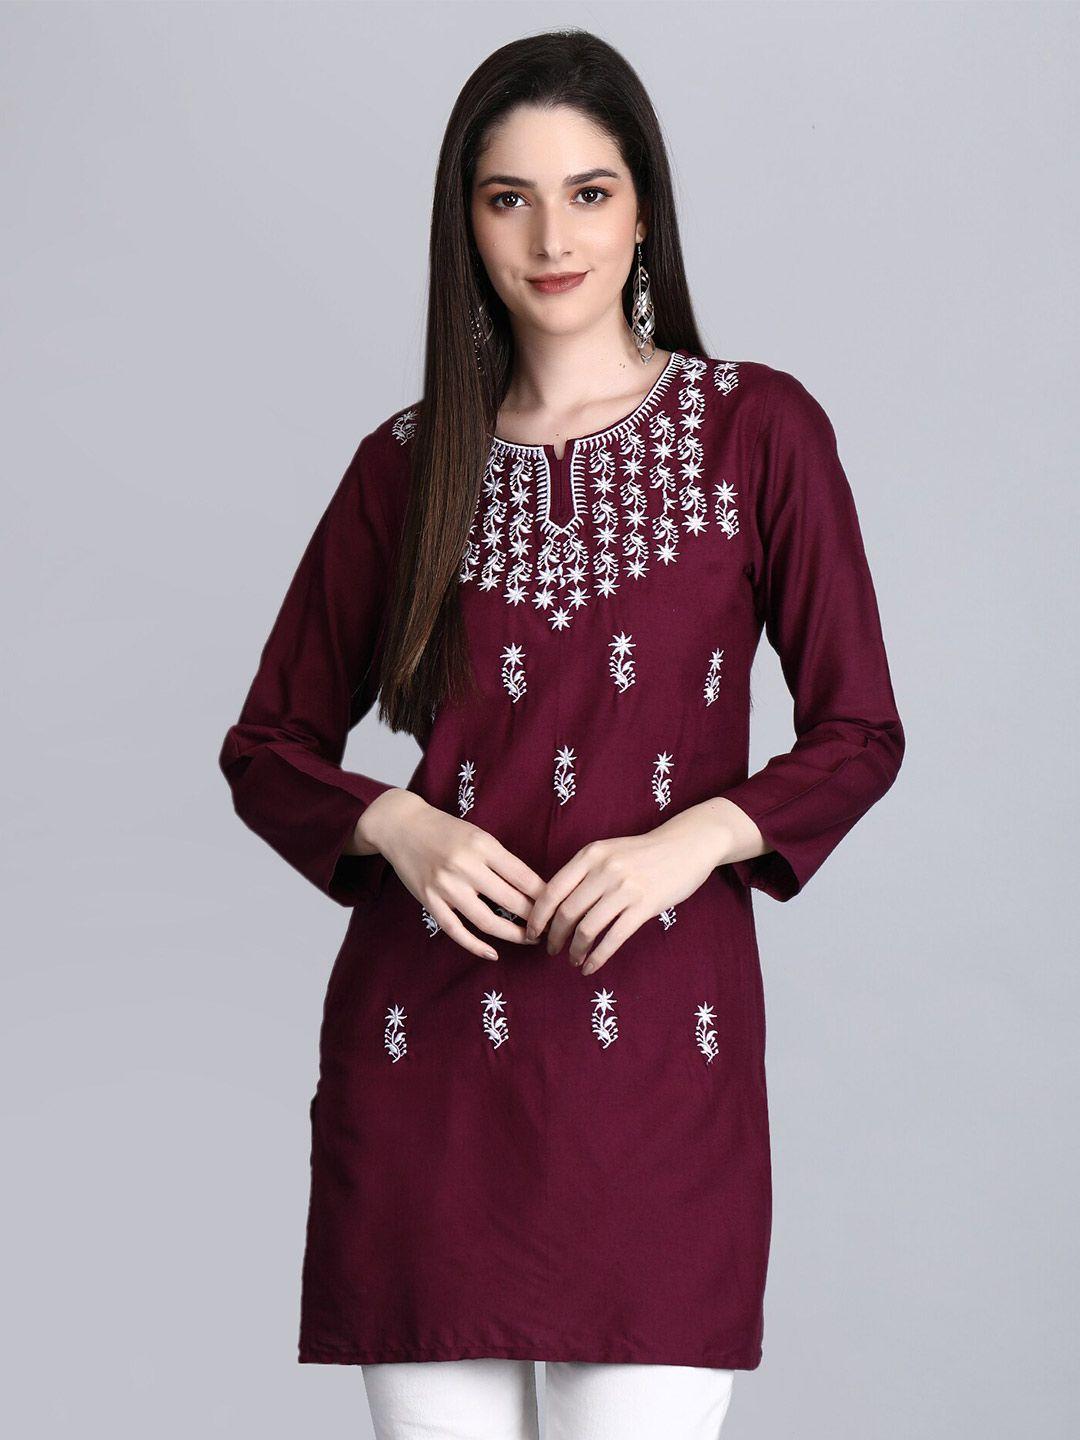 sgrf maroon embroidered top